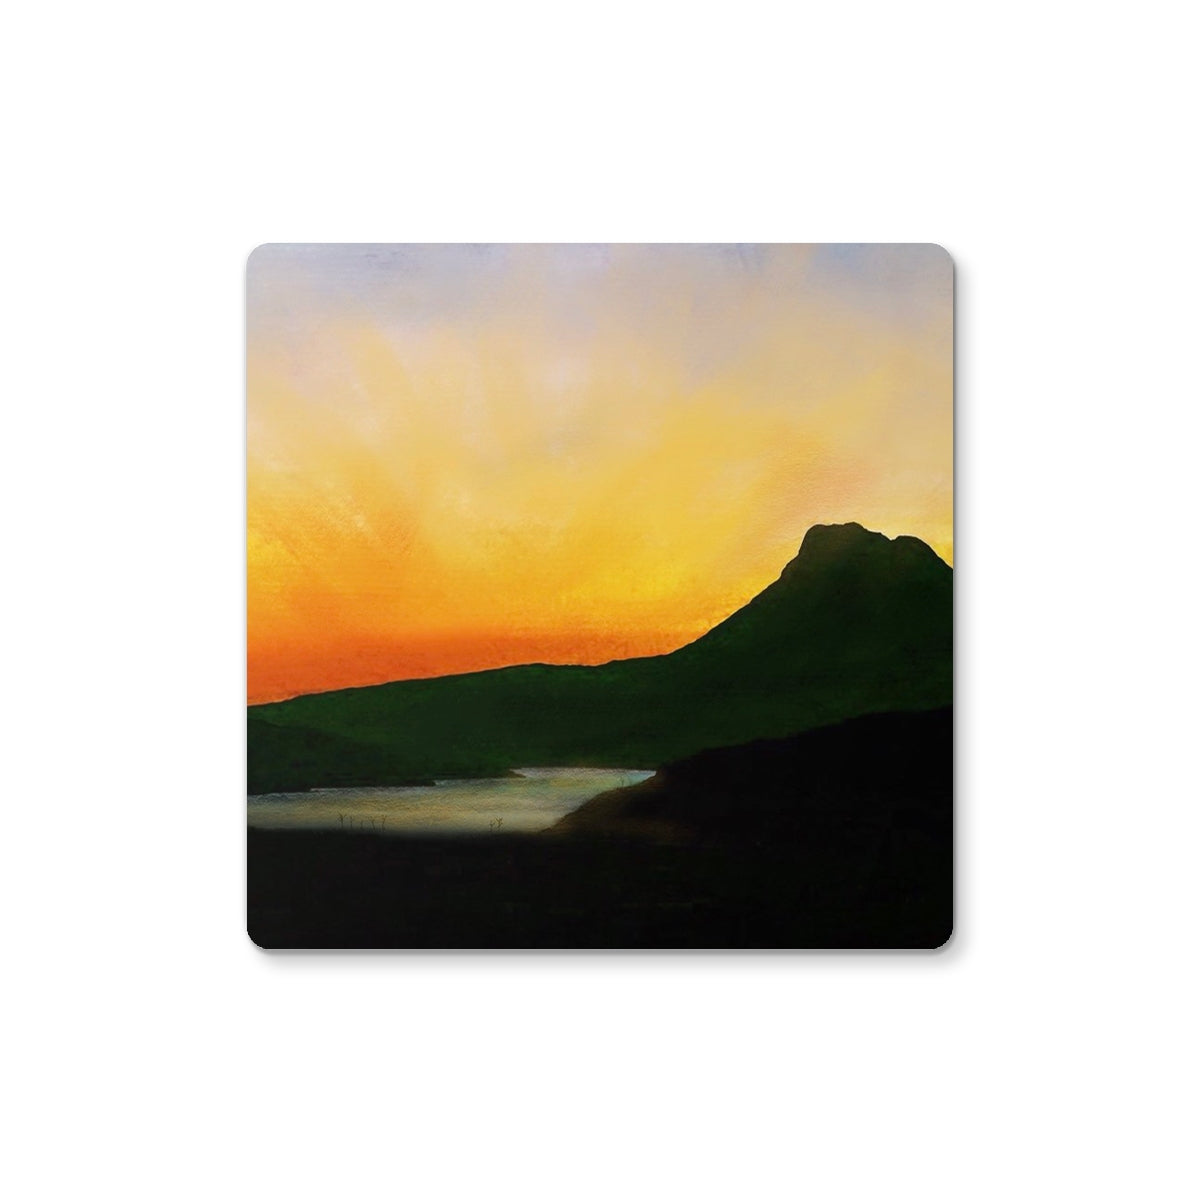 Stac Pollaidh Dusk Art Gifts Coaster-Coasters-Scottish Lochs & Mountains Art Gallery-2 Coasters-Paintings, Prints, Homeware, Art Gifts From Scotland By Scottish Artist Kevin Hunter